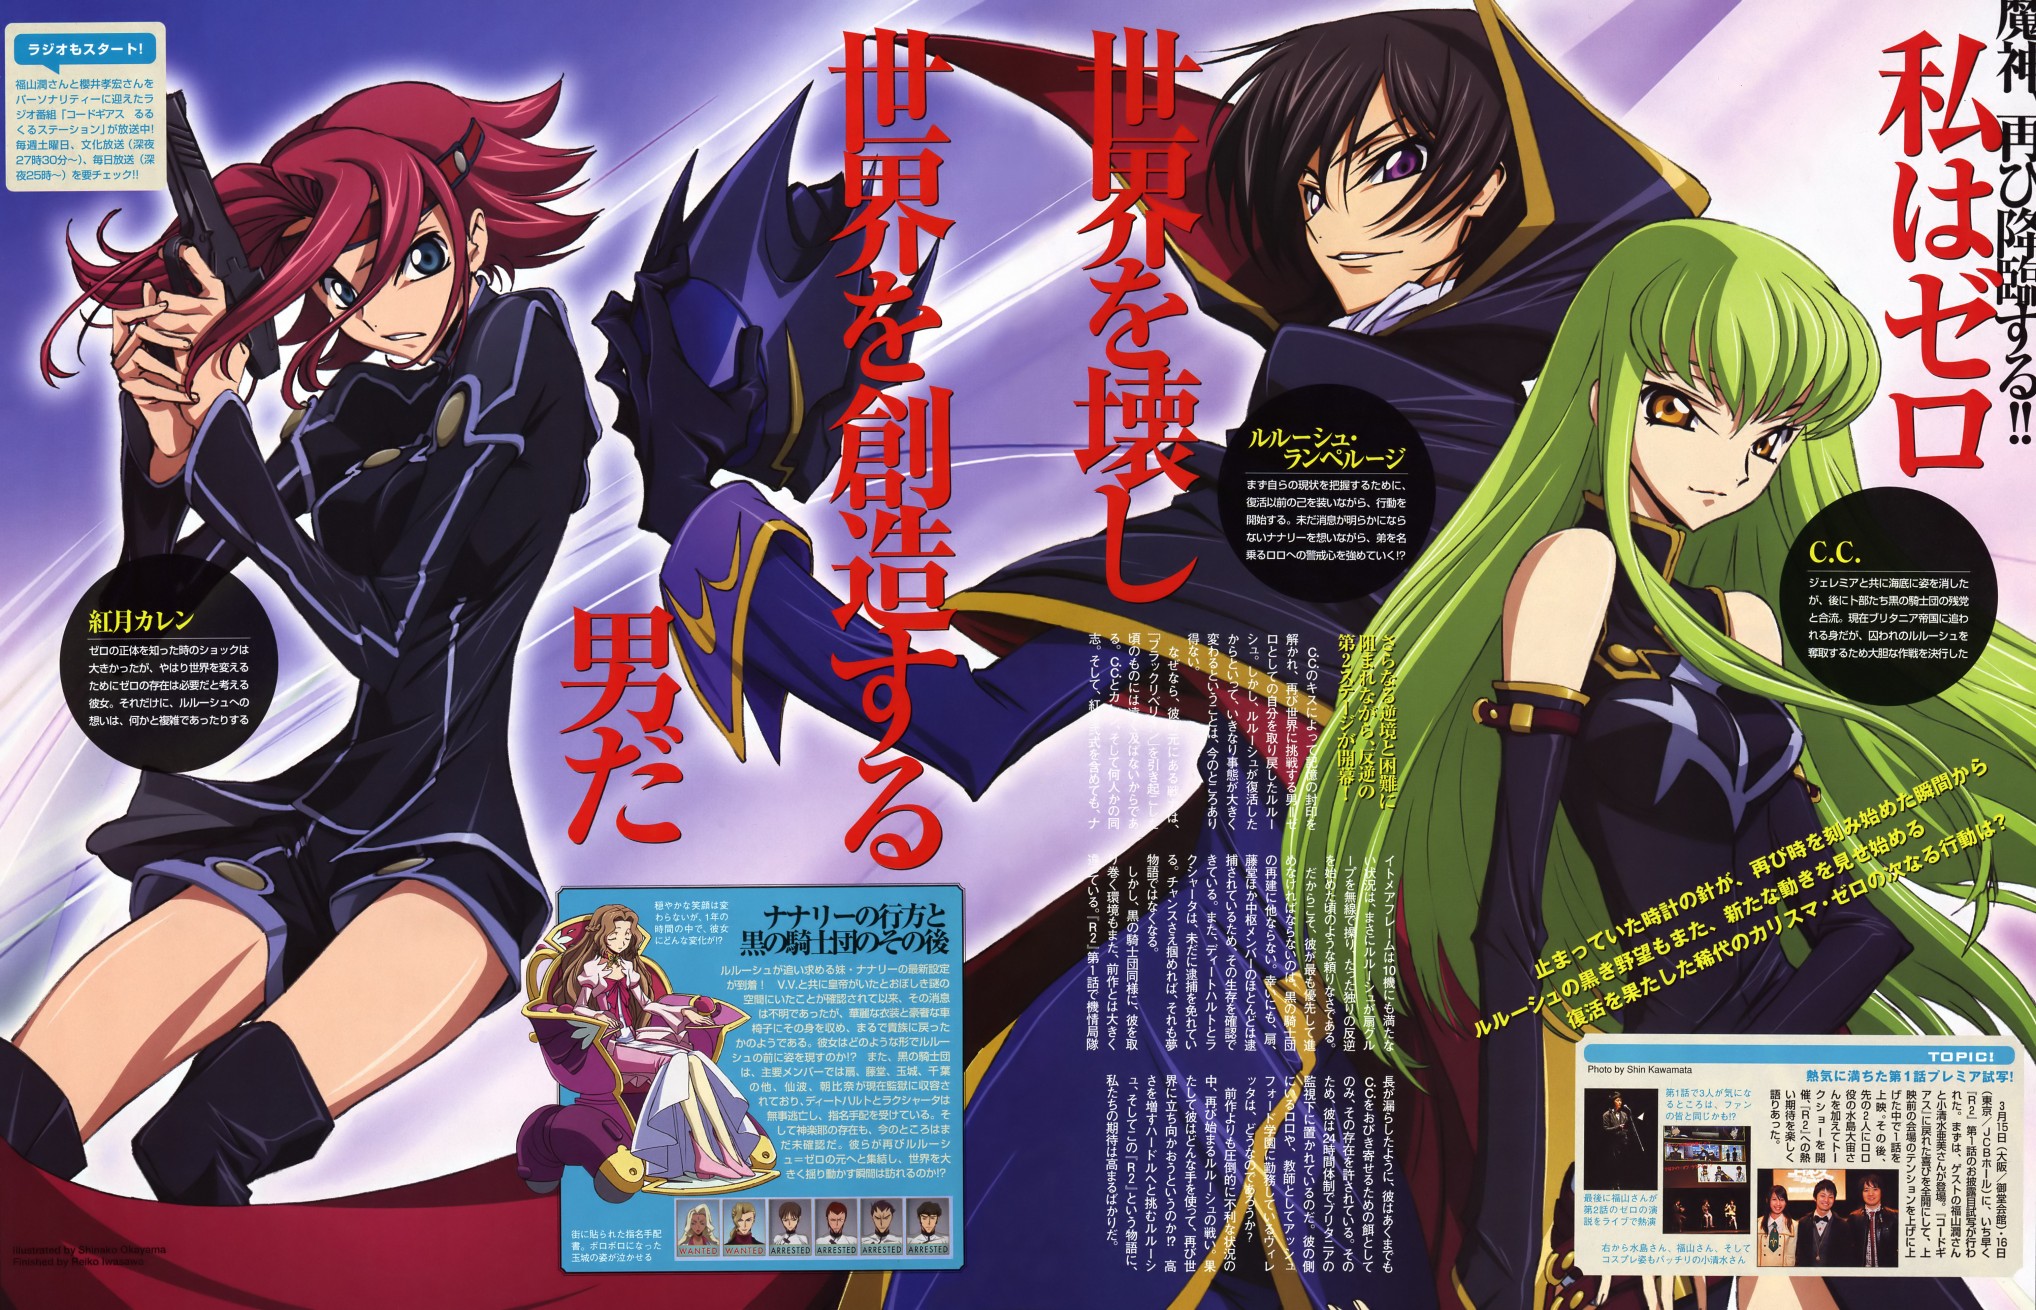 Top 10 Anime Series Males Would Recommend to Others haruhichan.com Code Geass Hangyaku no Lelouch